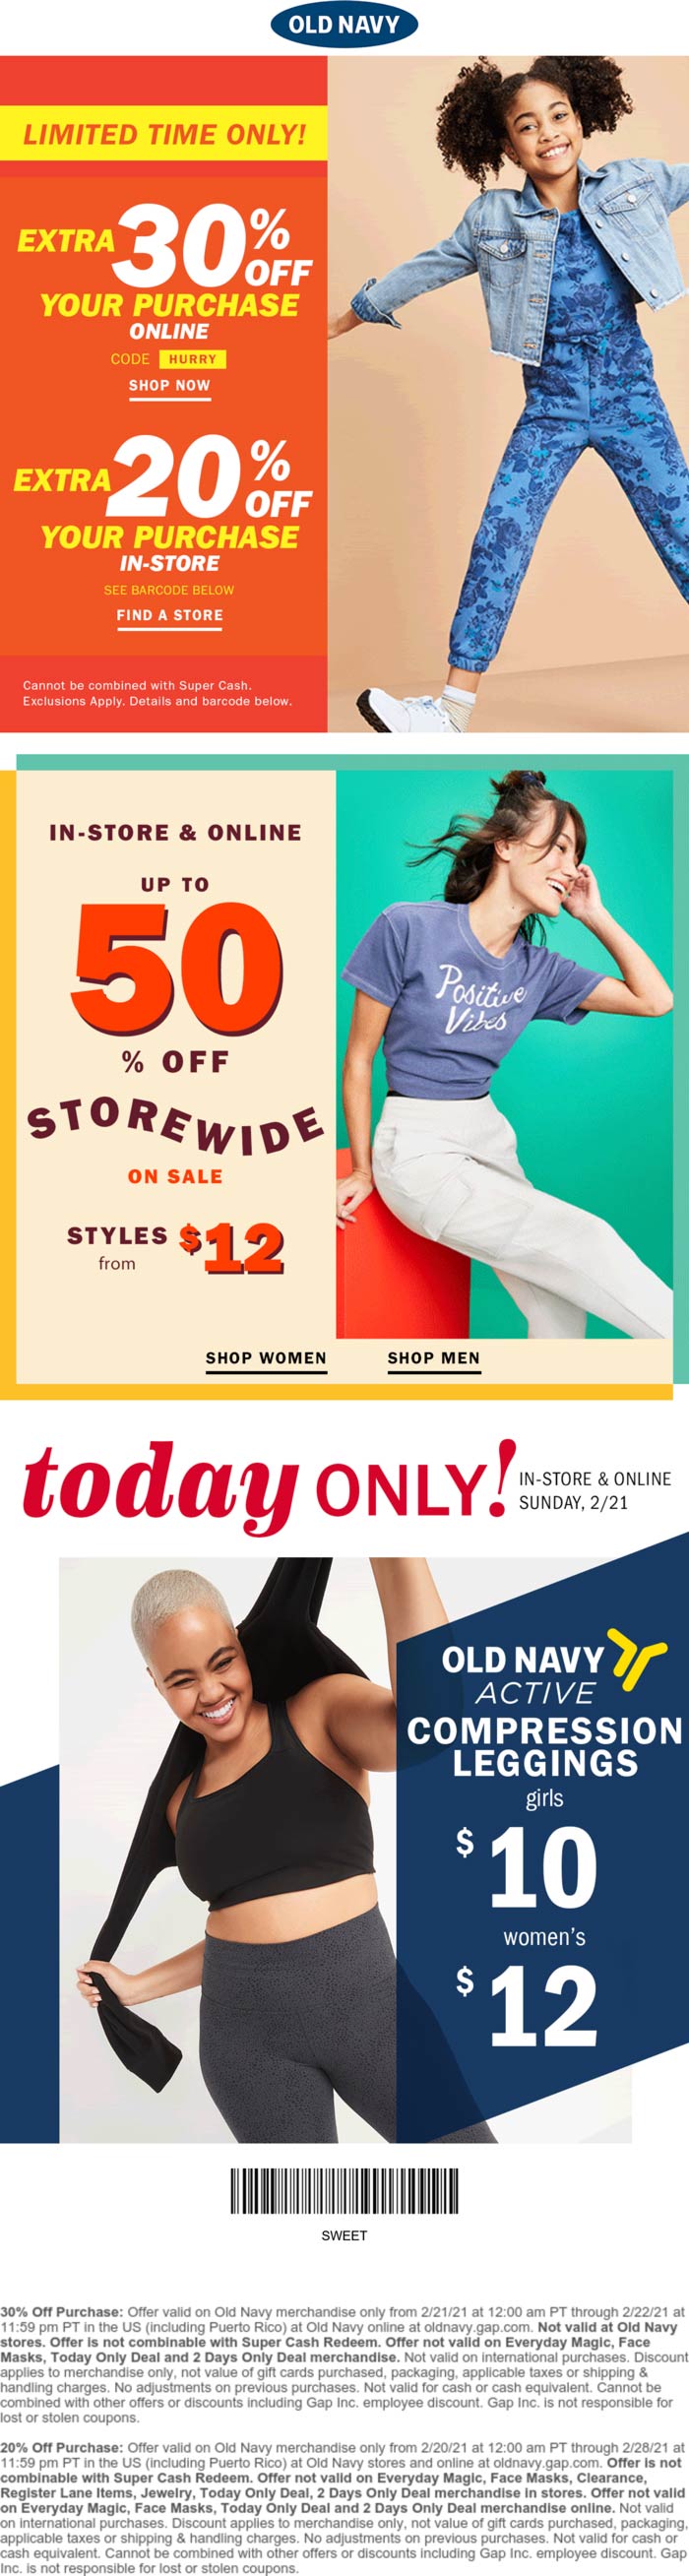 Old Navy stores Coupon  20% off at Old Navy, or 30% online via promo code HURRY #oldnavy 